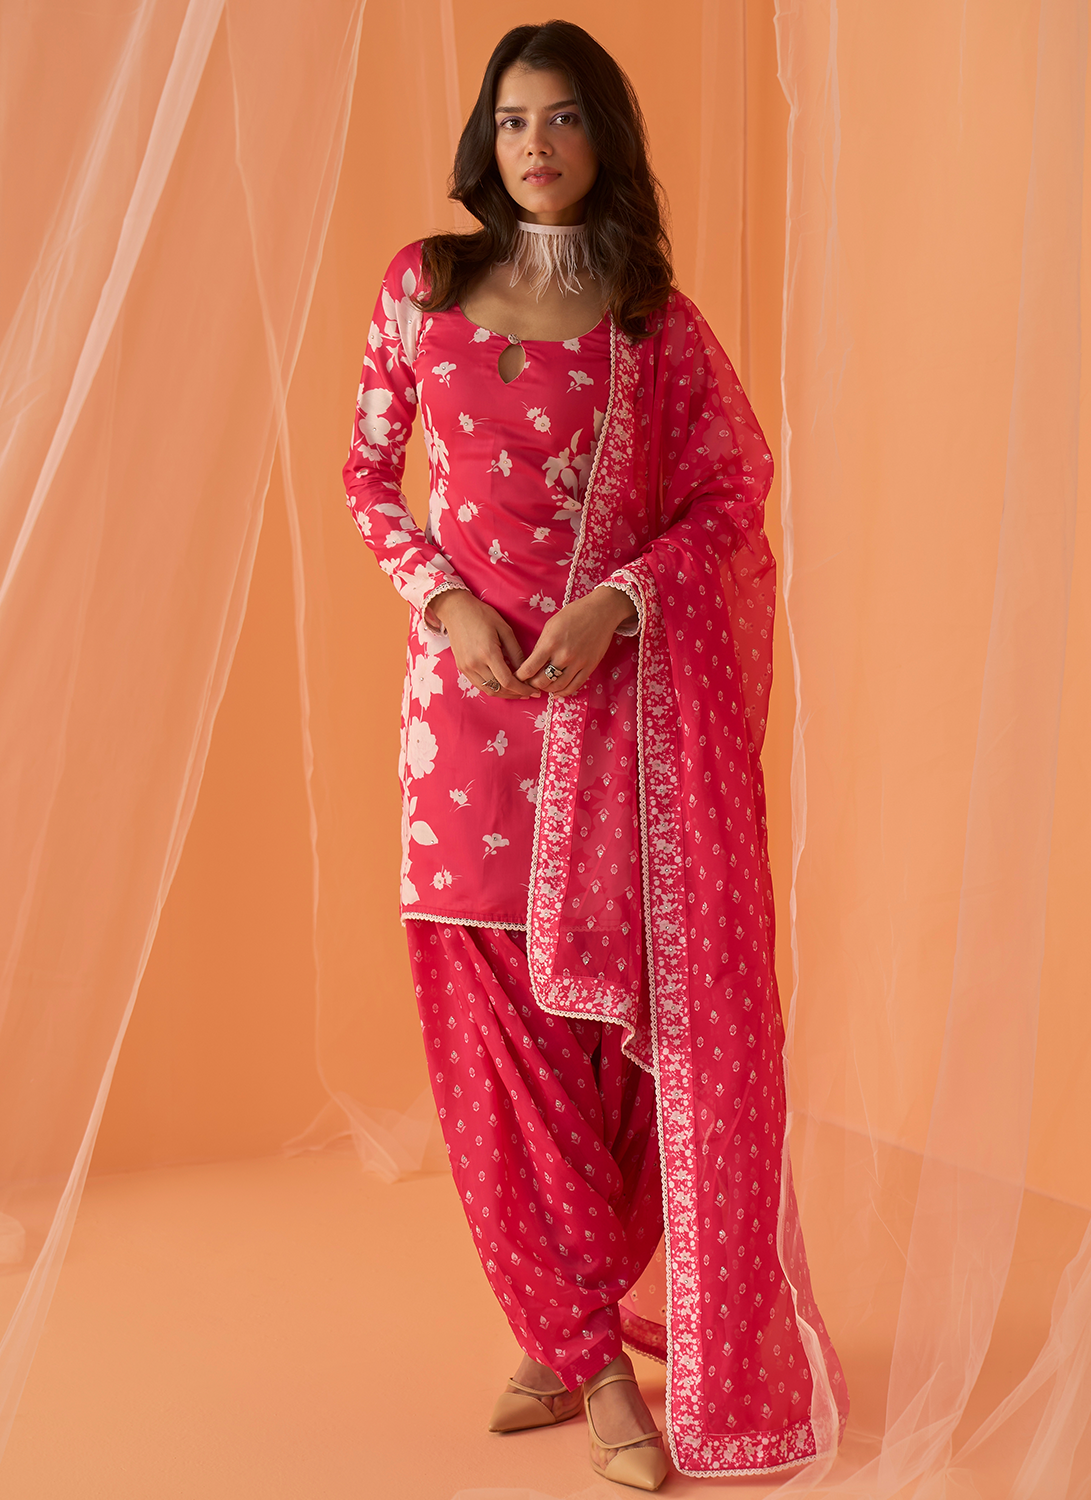 Hot Pink and White Floral Punjabi Suit